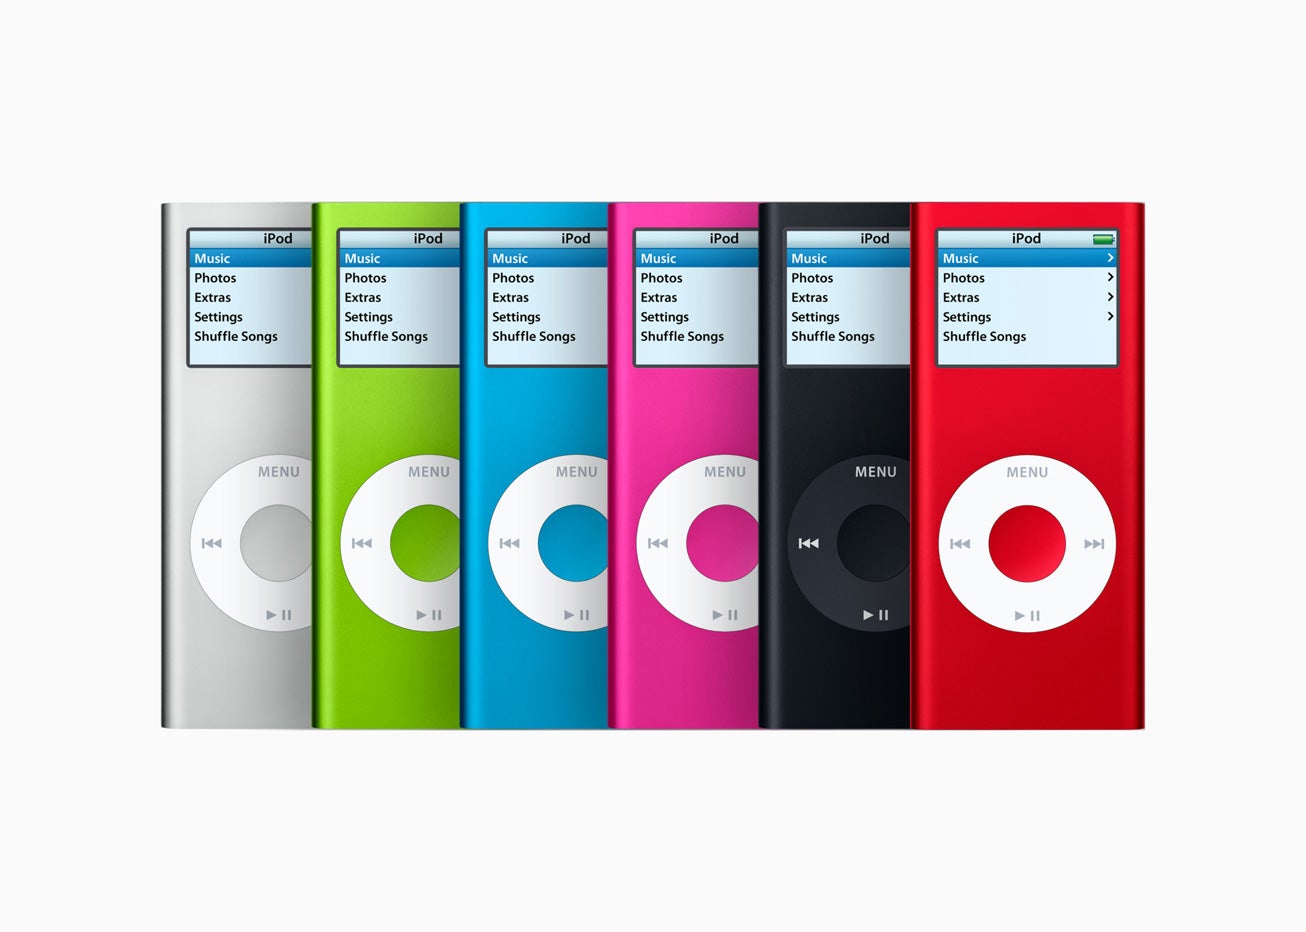 3 iPod models now etched in gadget history